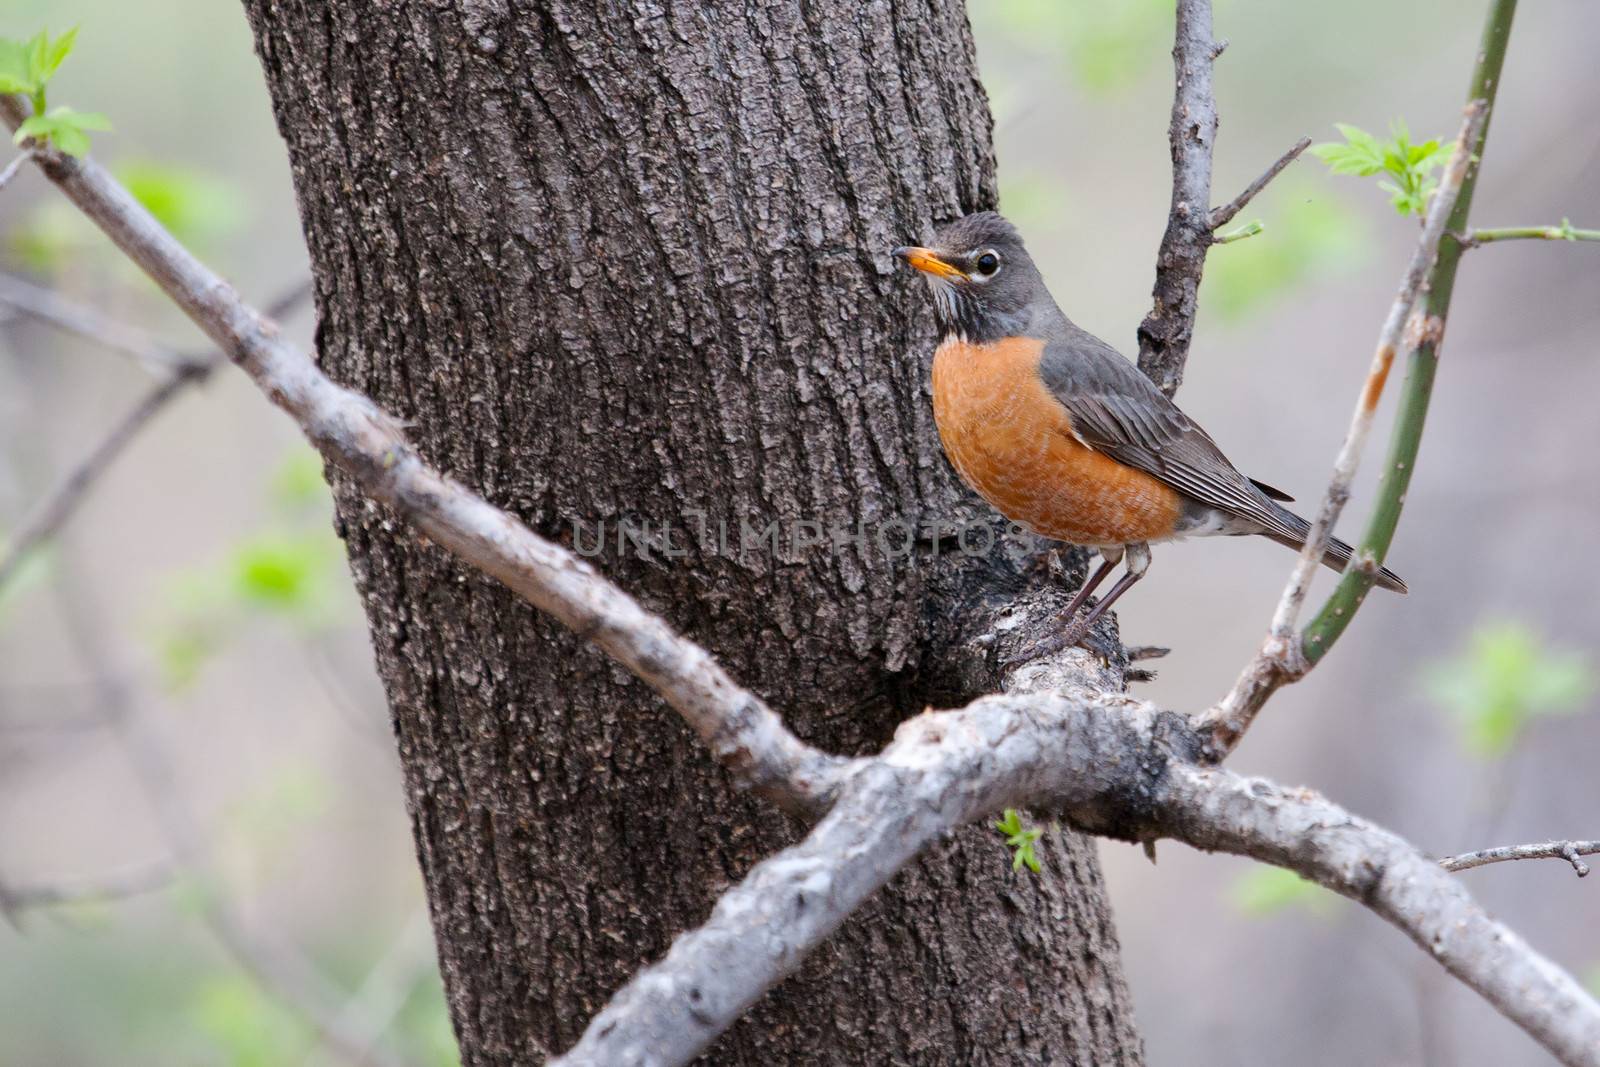 American Robin perched in a tree looking attentive.